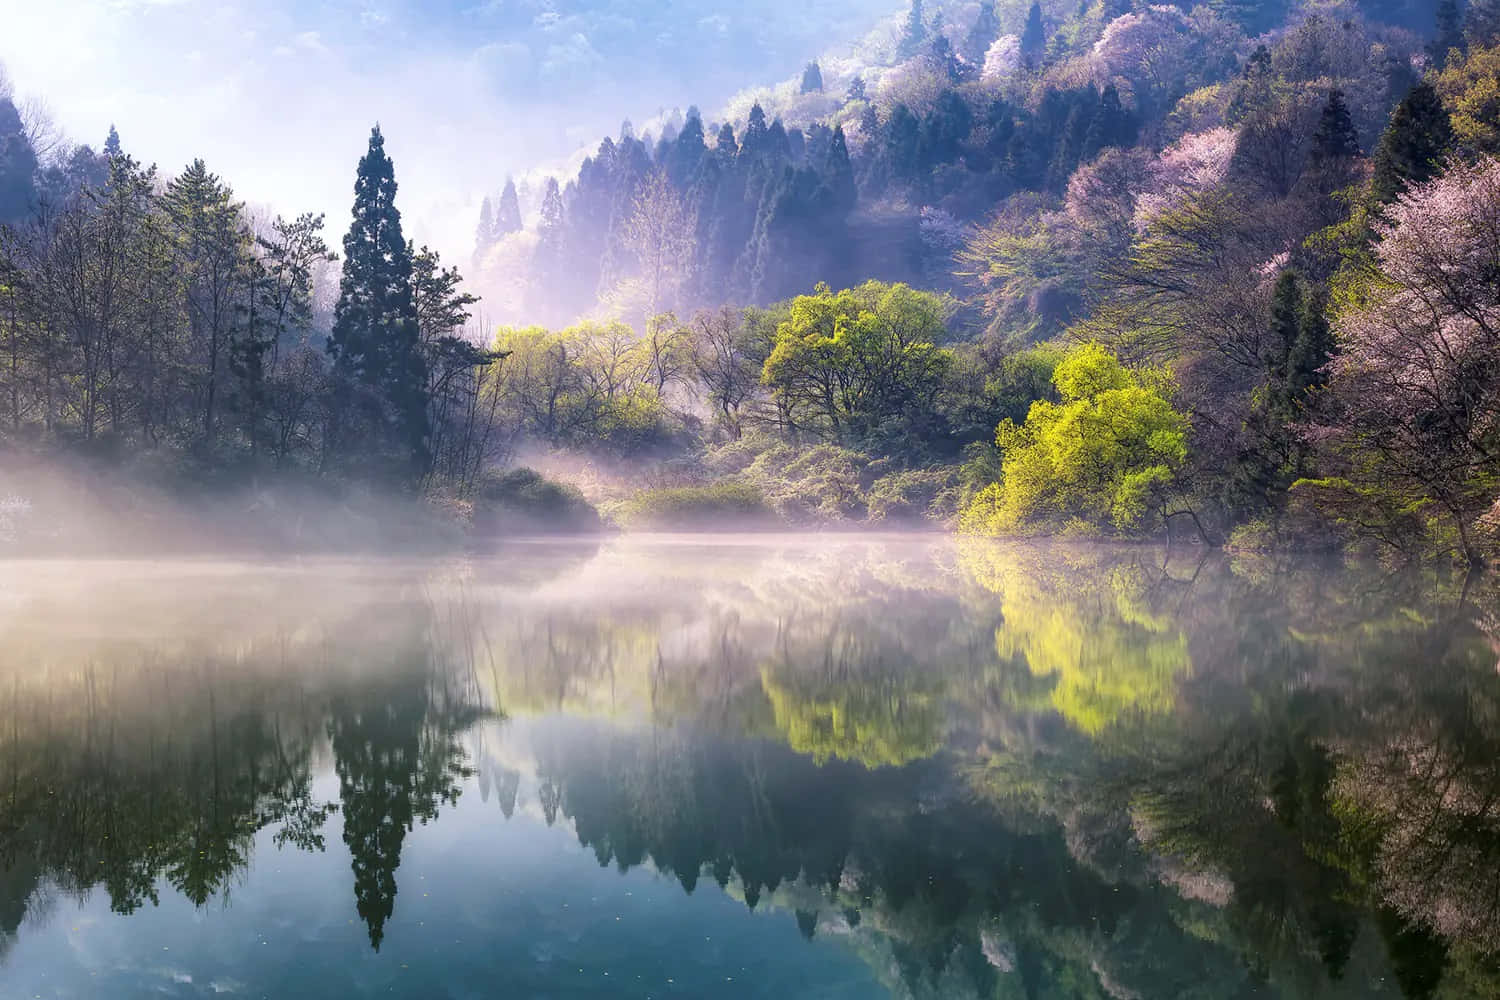 A Lake With Trees And Mist In The Background